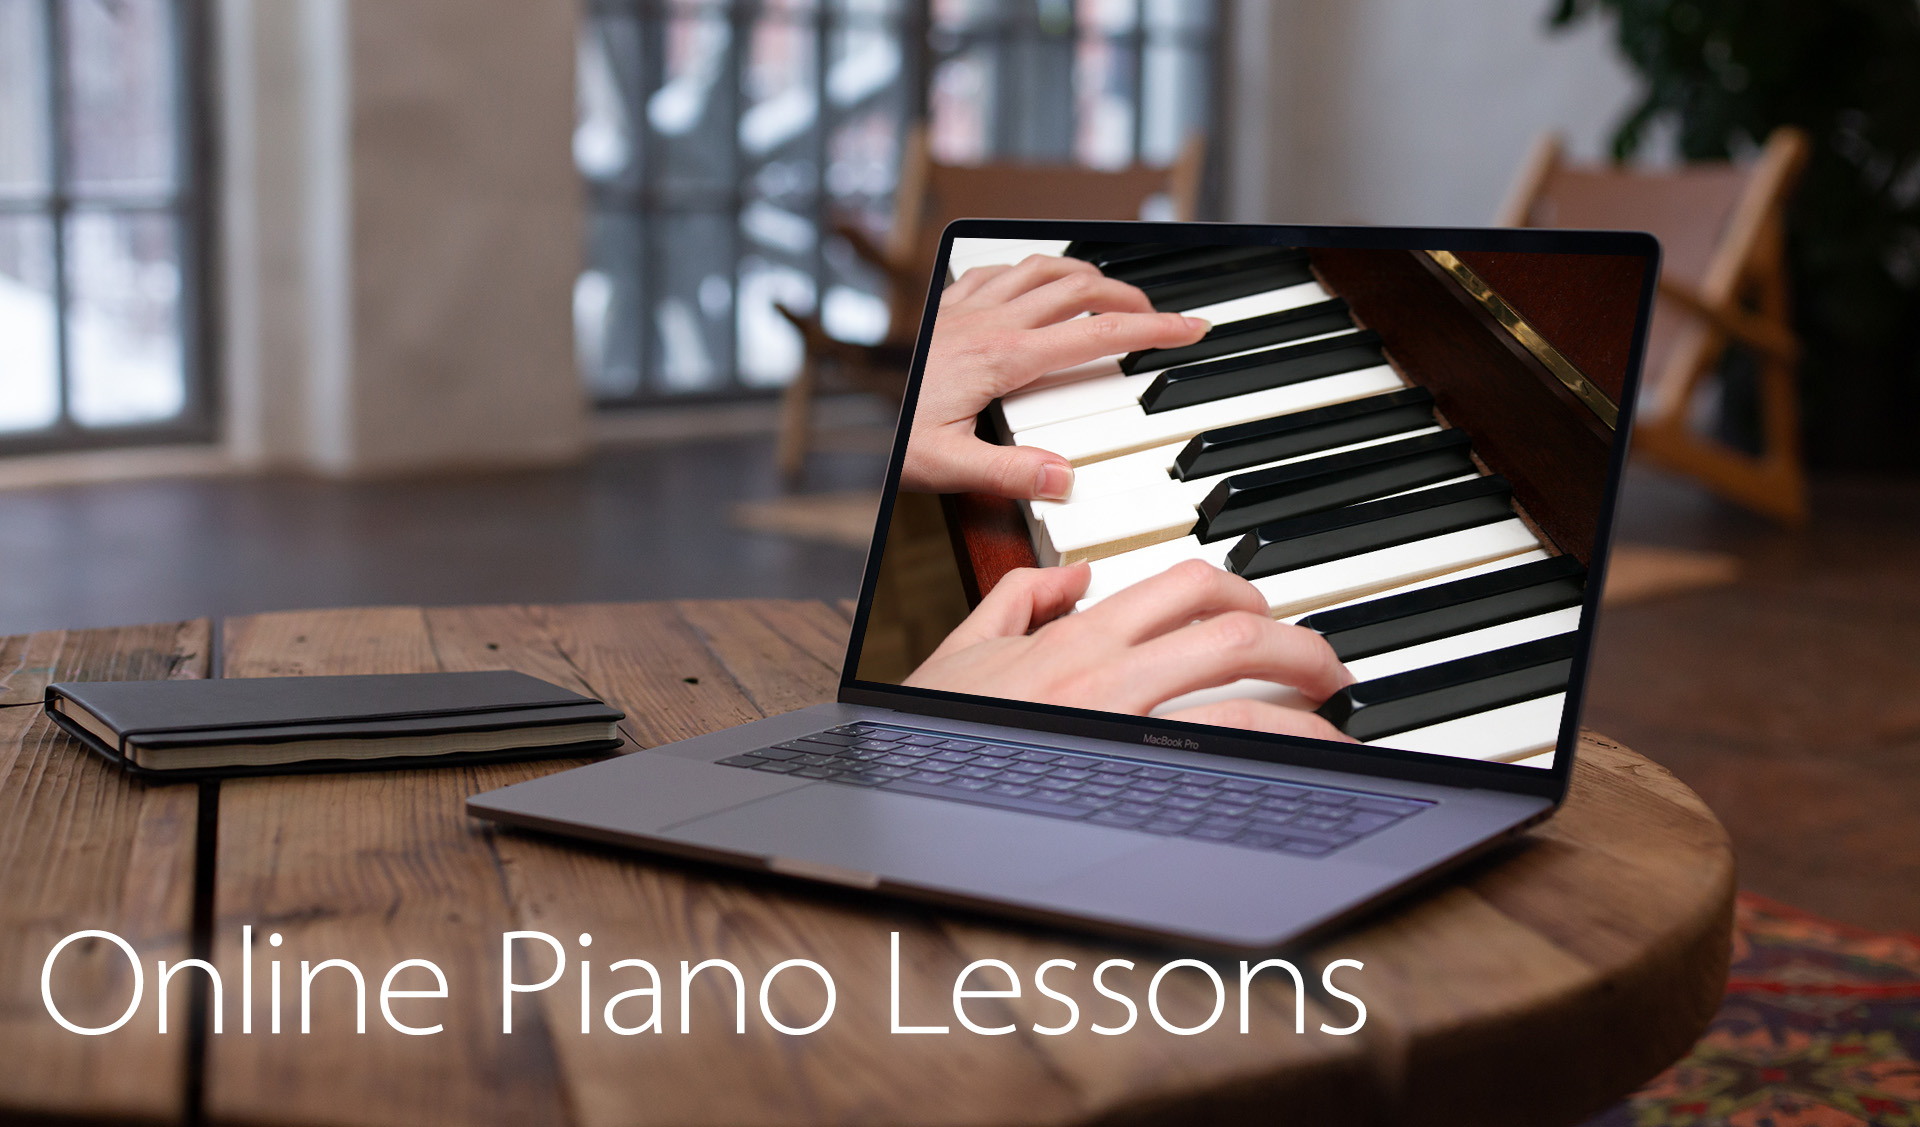 Live online piano lessons with Dr. Lory Peters